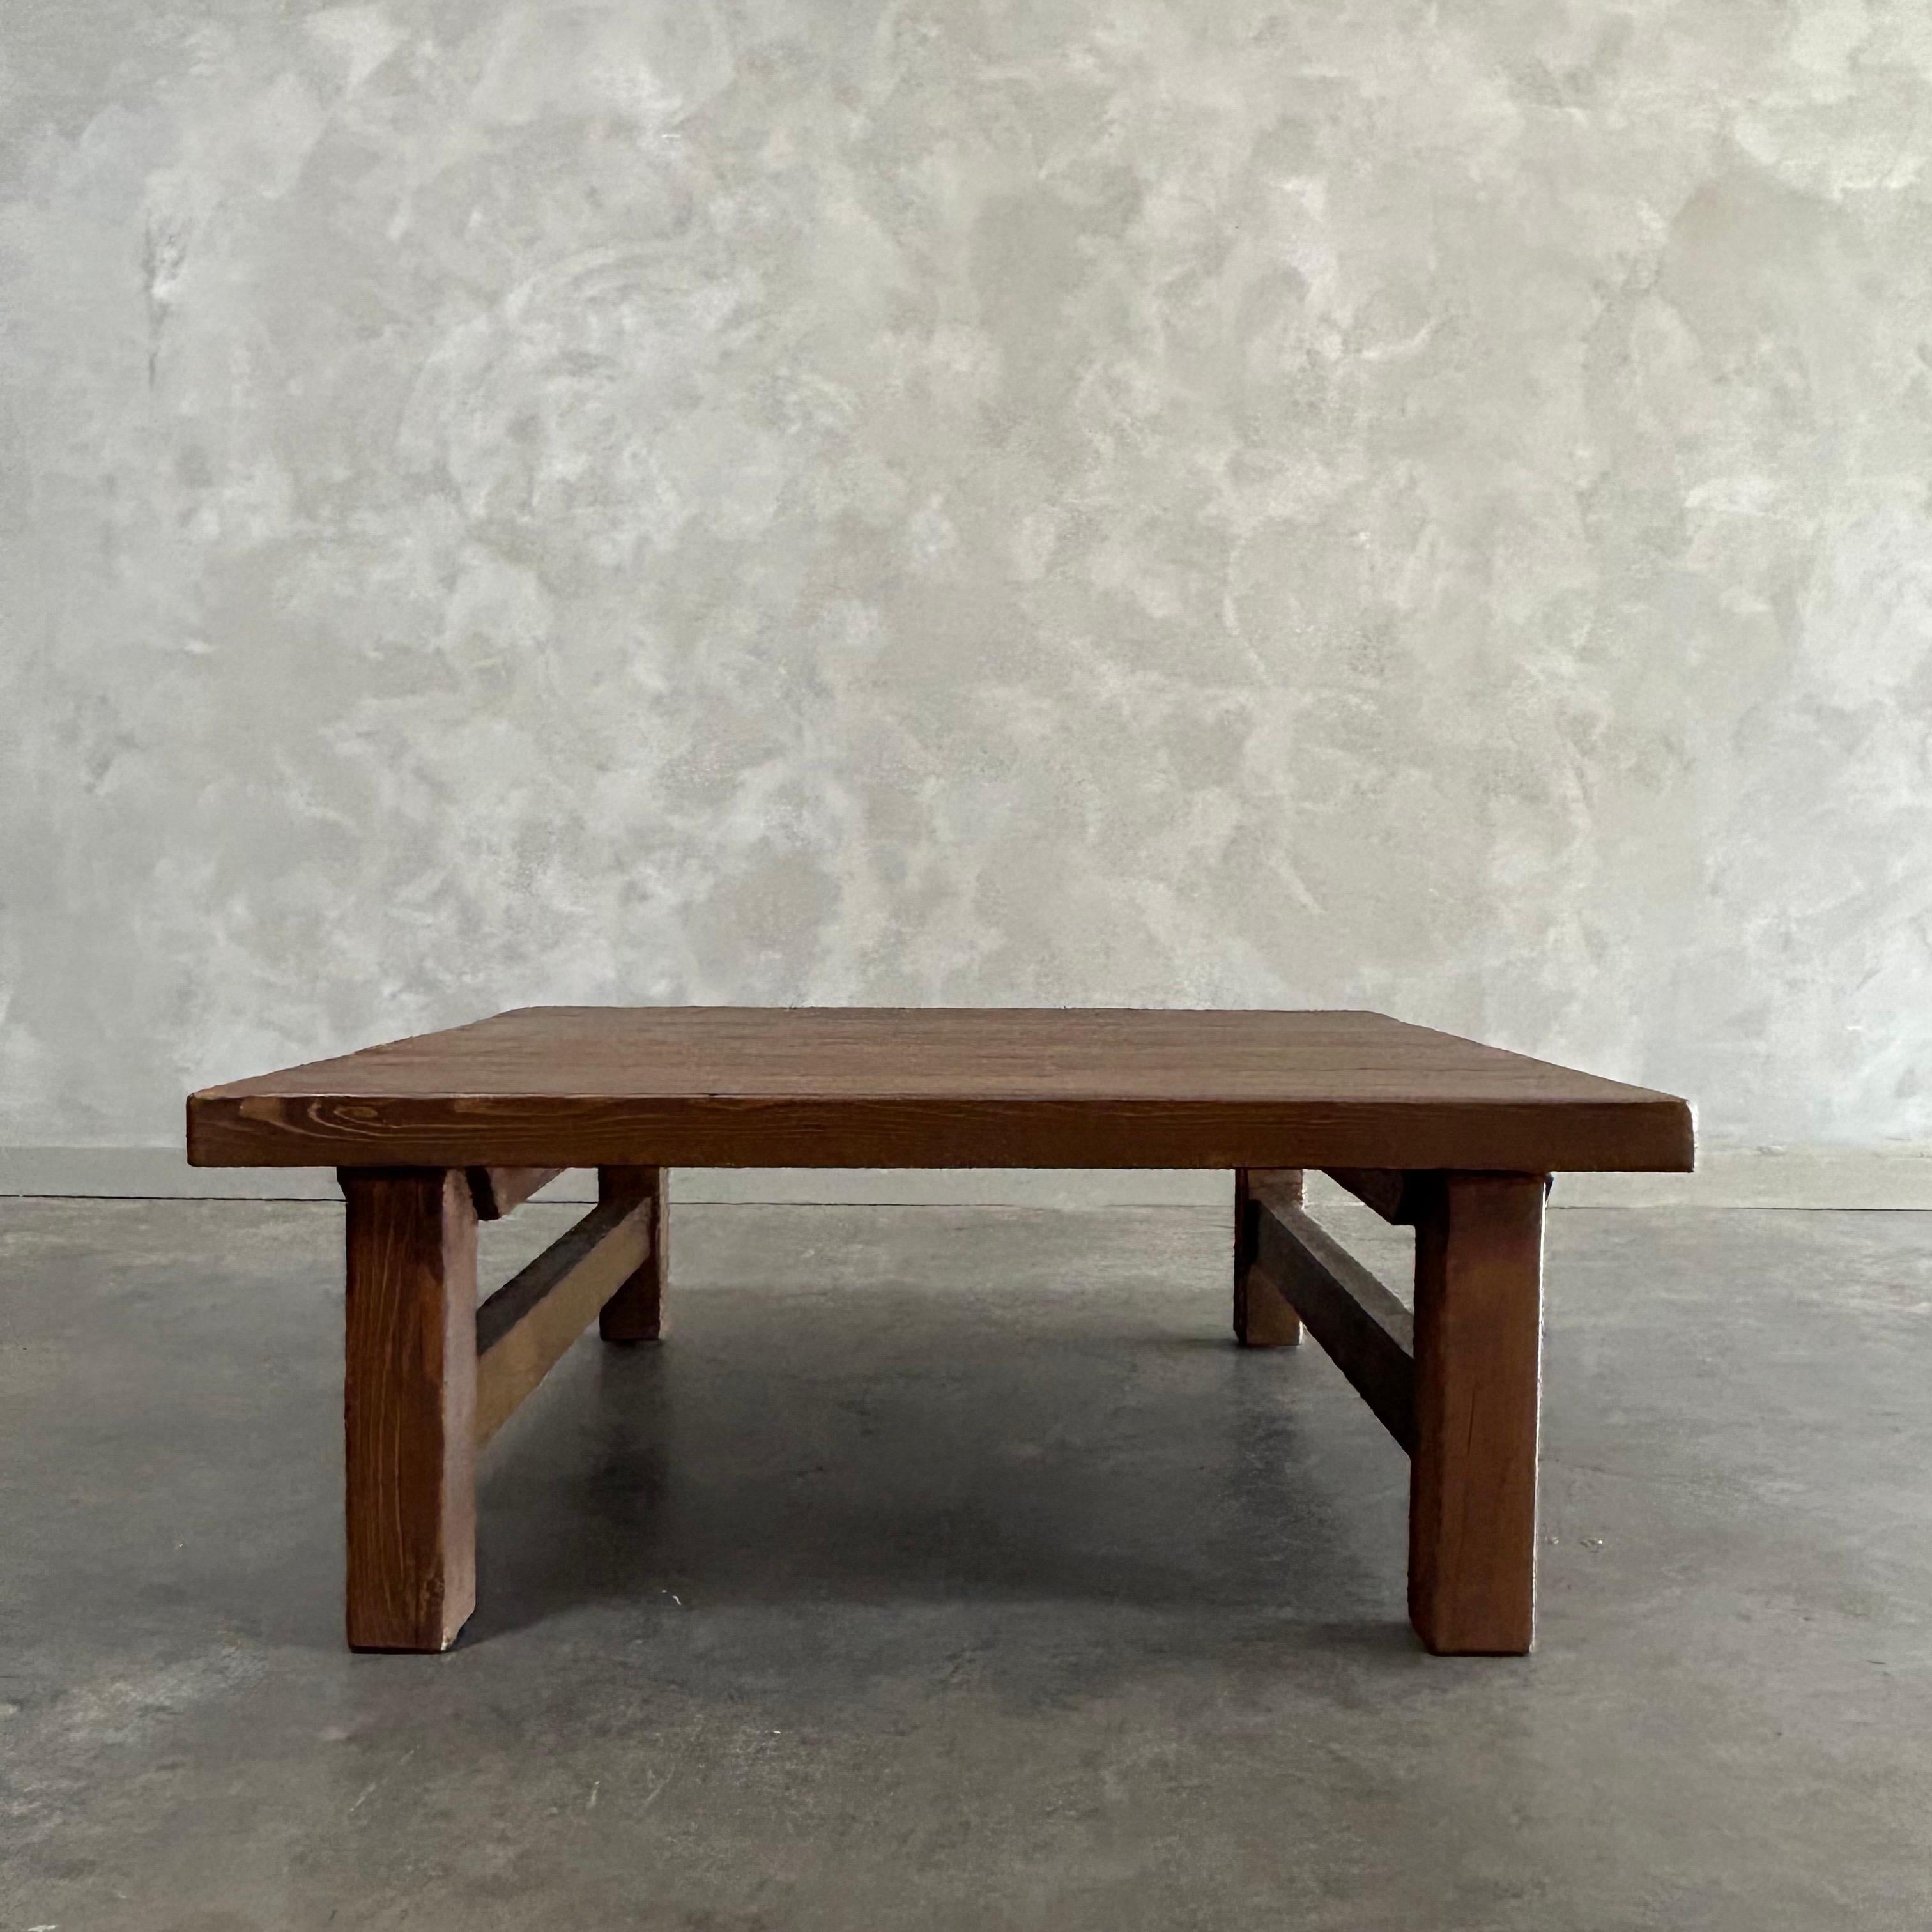 Keya coffee table Finish: Walnut 
These old pine timbers show in its most primal, natural form. The artisanal construction methods highlight the pine woods beautiful grain pattern & knots and fissures from its past life. The most authentic materials